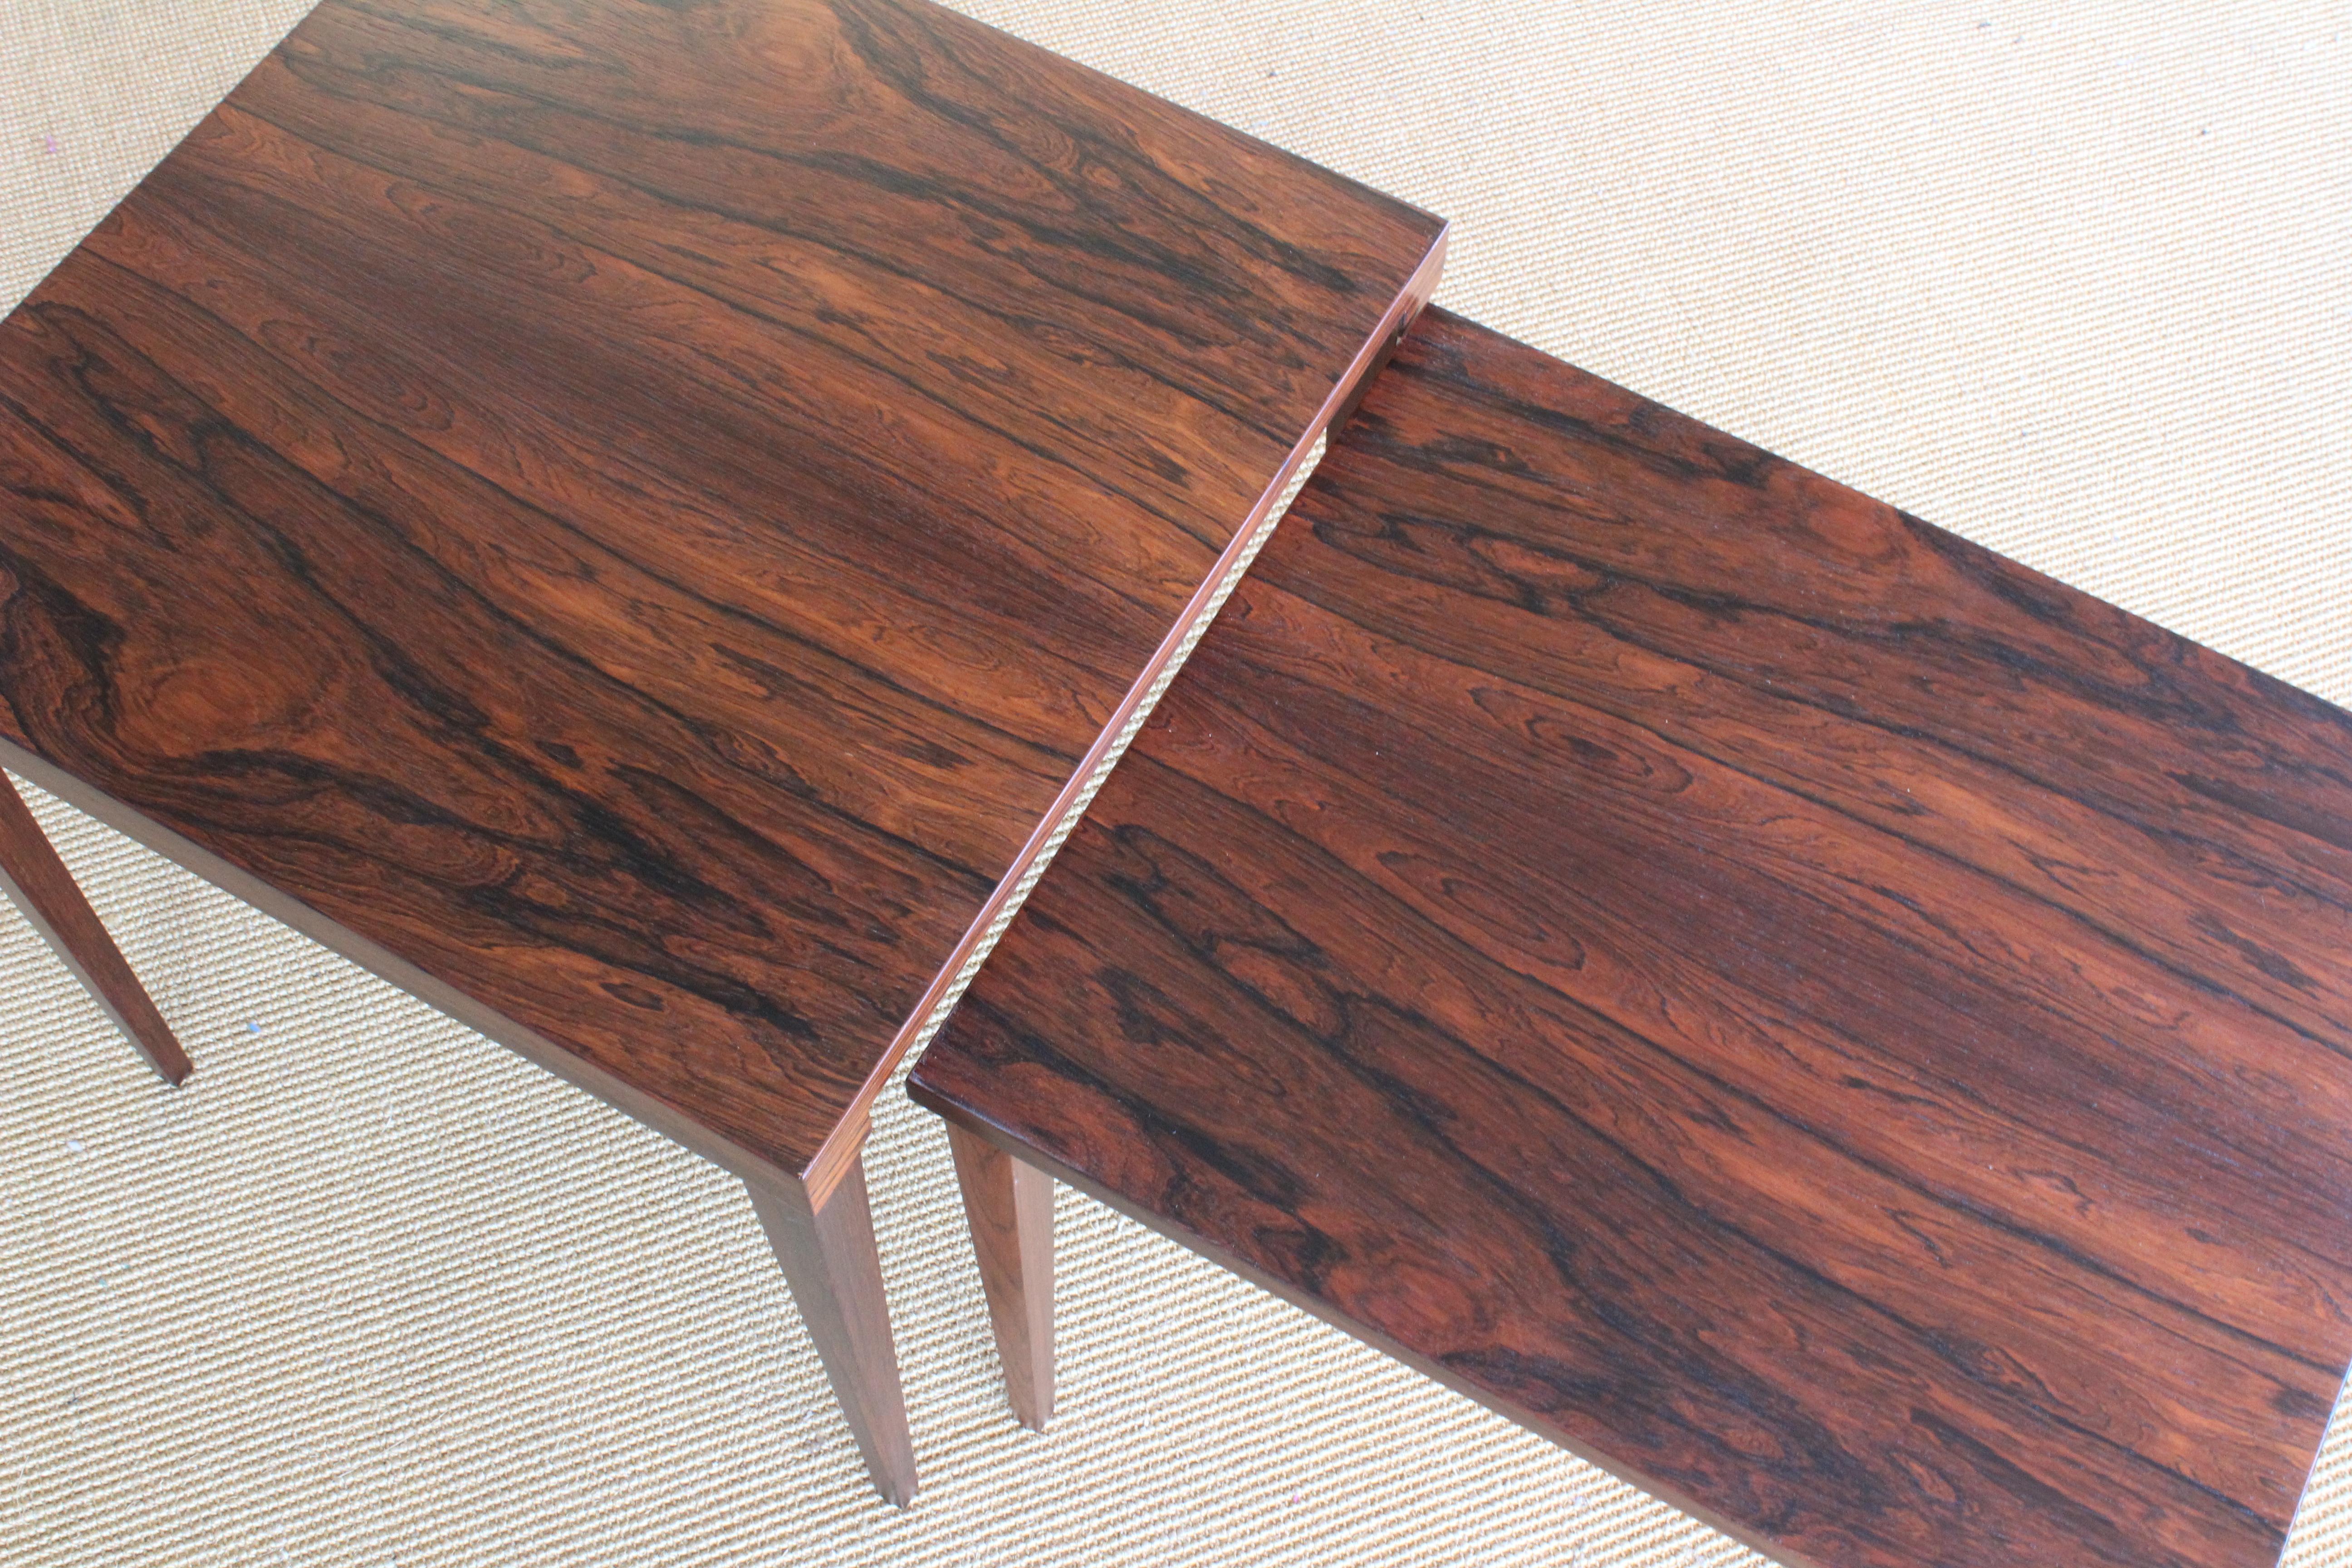 Mid-20th Century Rosewood Nesting Tables, Denmark, 1950s